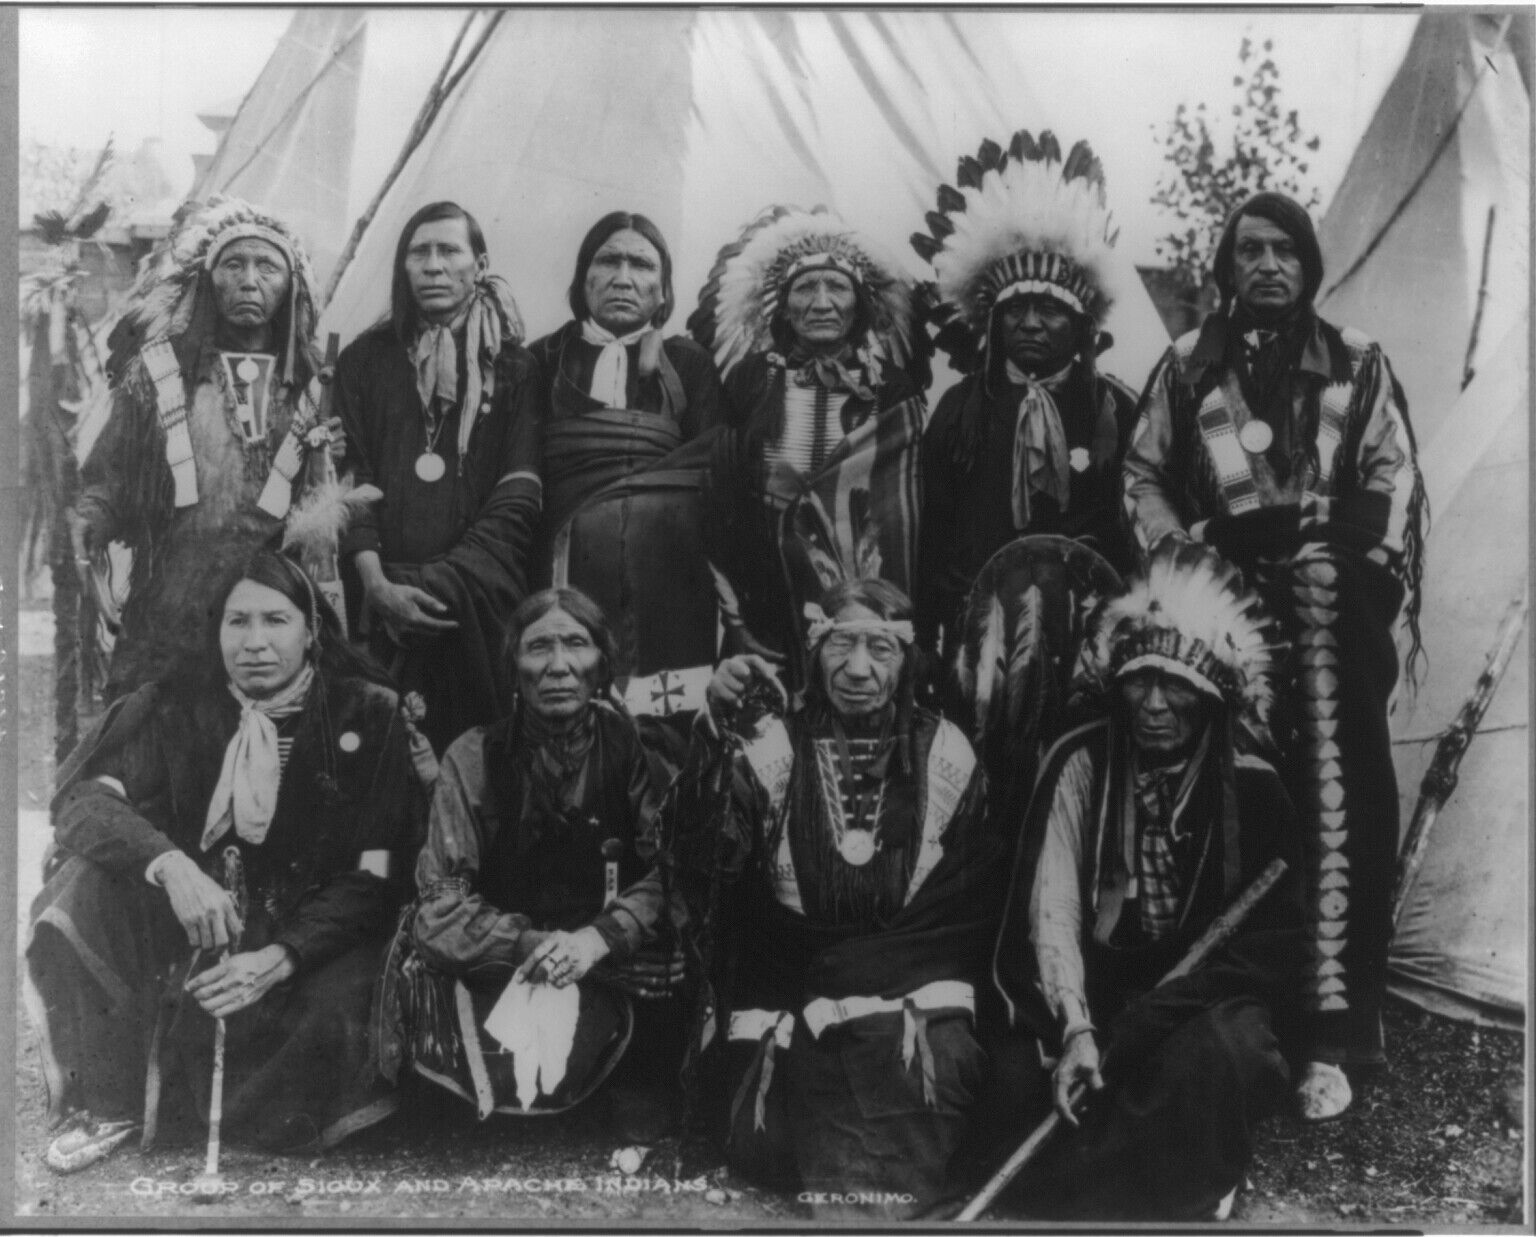 1904 Group of APACHE & SIOUX INDIANS Native Photo Picture 8